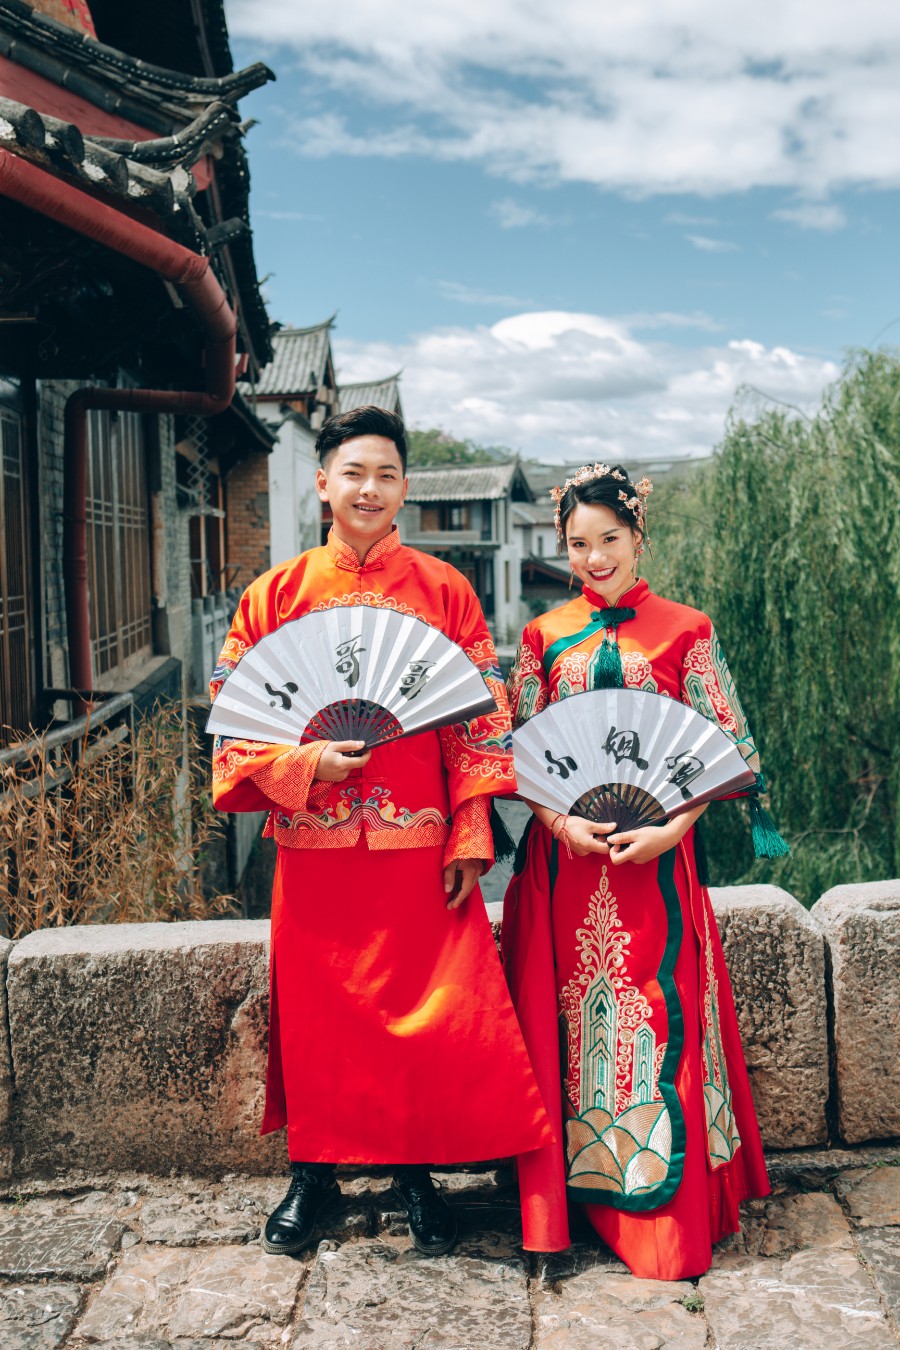 Yunnan Outdoor Pre-Wedding Photoshoot At Lijiang Jade Dragon Mountain & Ancient Town by Cao on OneThreeOneFour 7